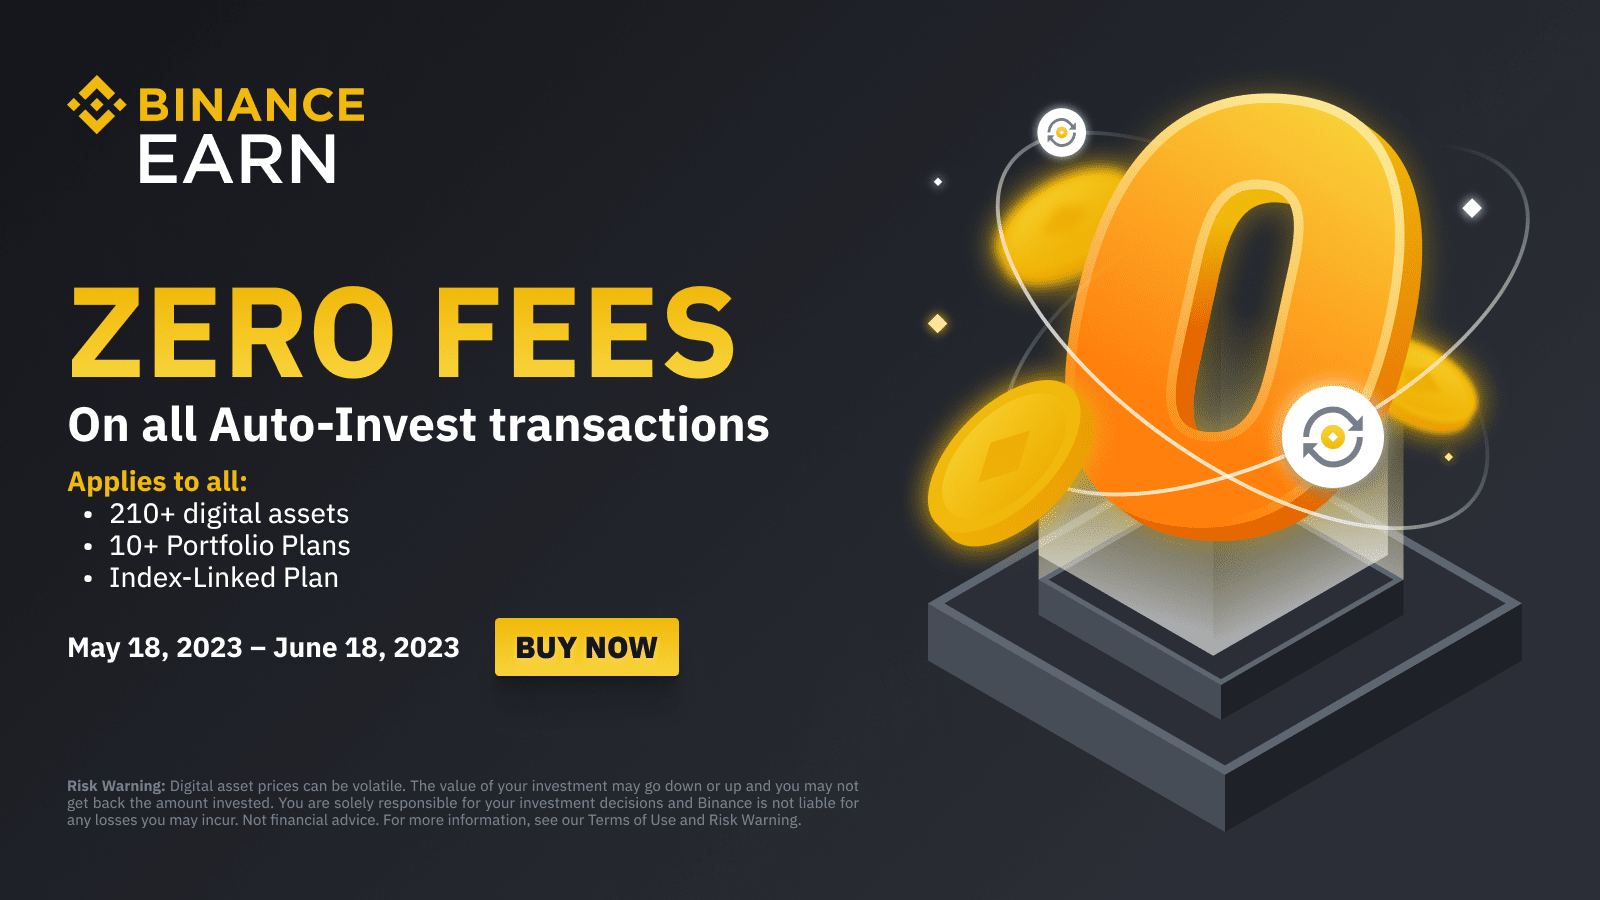 OKX vs Binance: Who Has the Lowest Fees? [] - CoinCodeCap